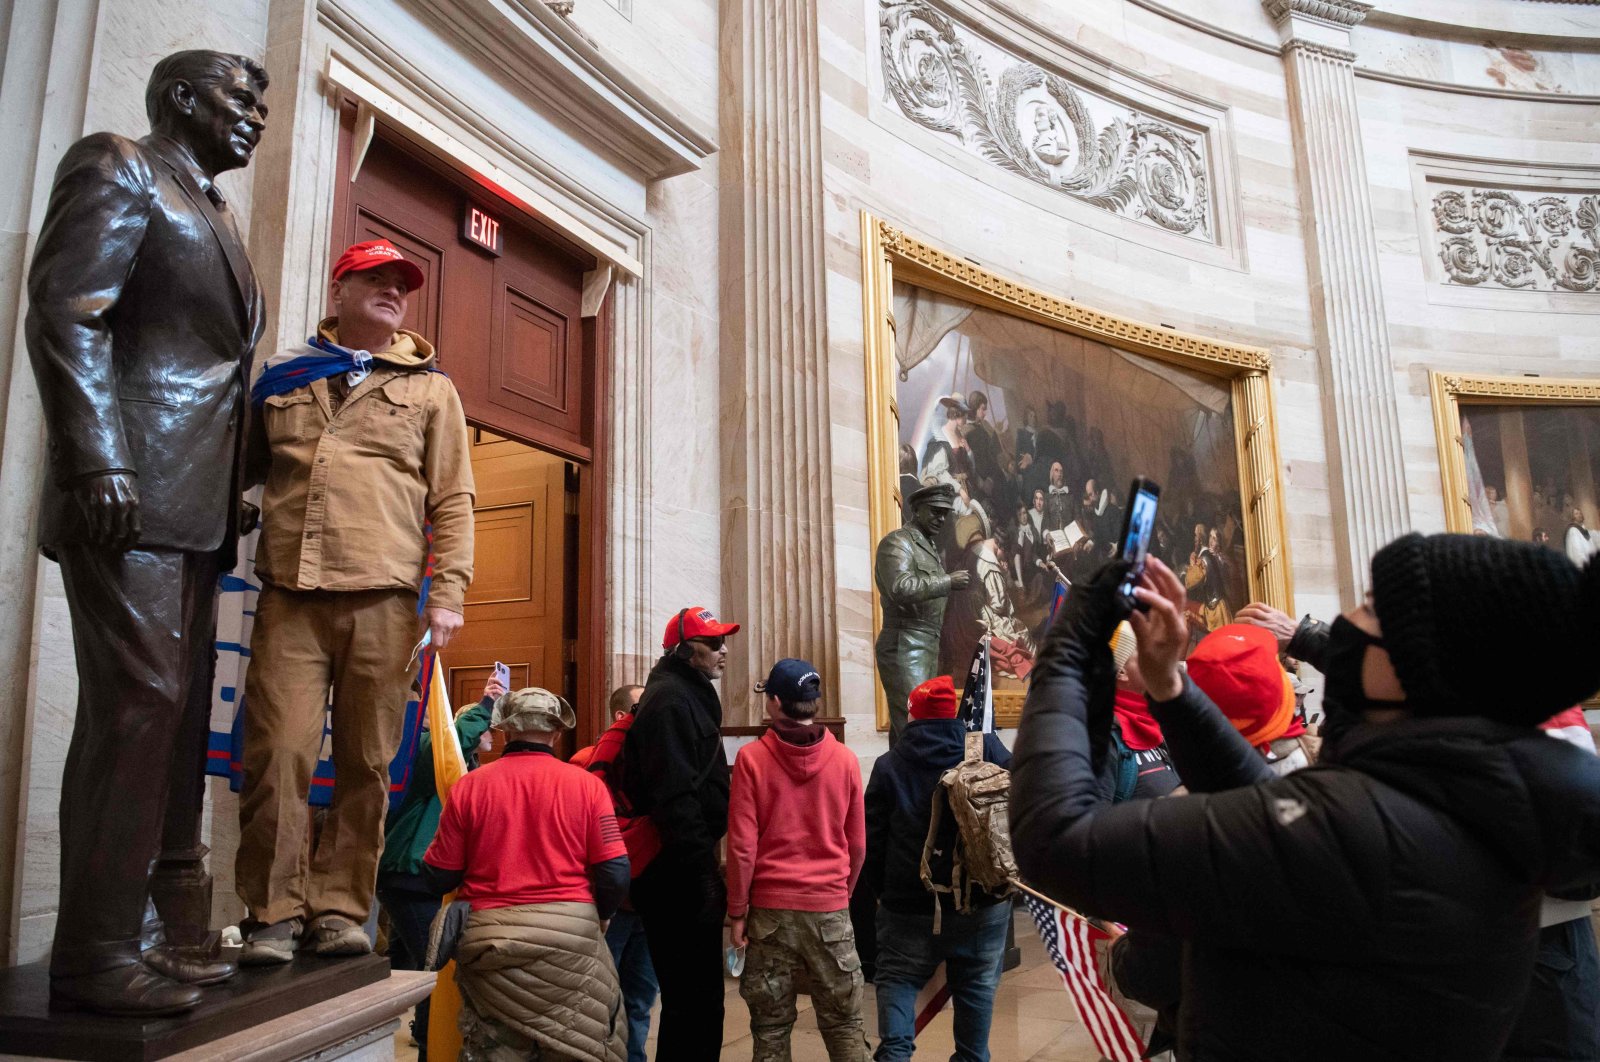 Supporters of U.S. President Donald Trump pose with statues inside the Rotunda after breaching the U.S. Capitol in Washington, D.C., Jan. 6, 2021. (AFP Photo)